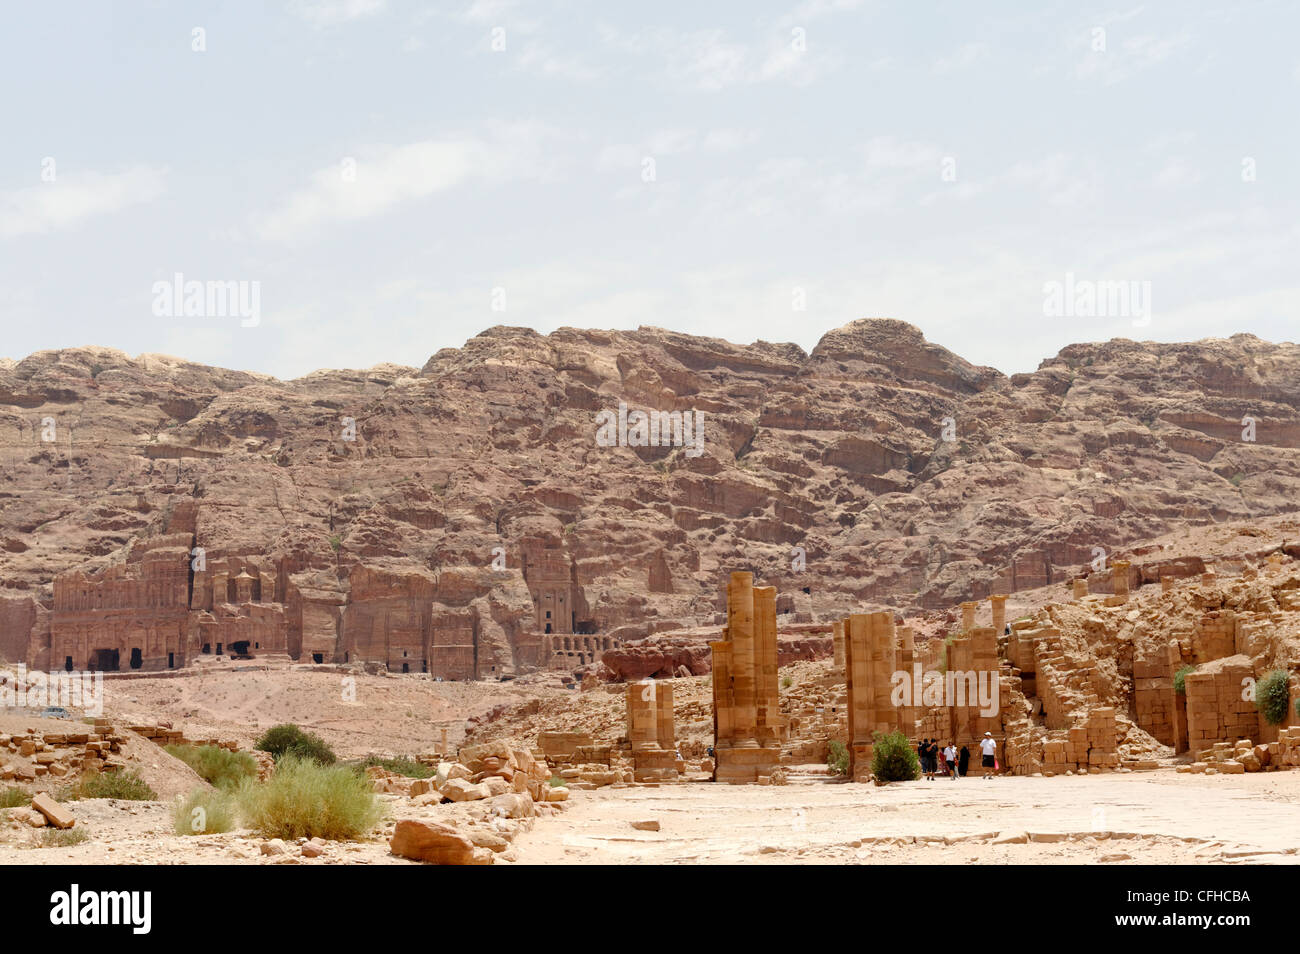 Petra. Jordan. Views of imposing Temenos Gate in the foreground and in the background are the facades of the Royal tombs carved Stock Photo